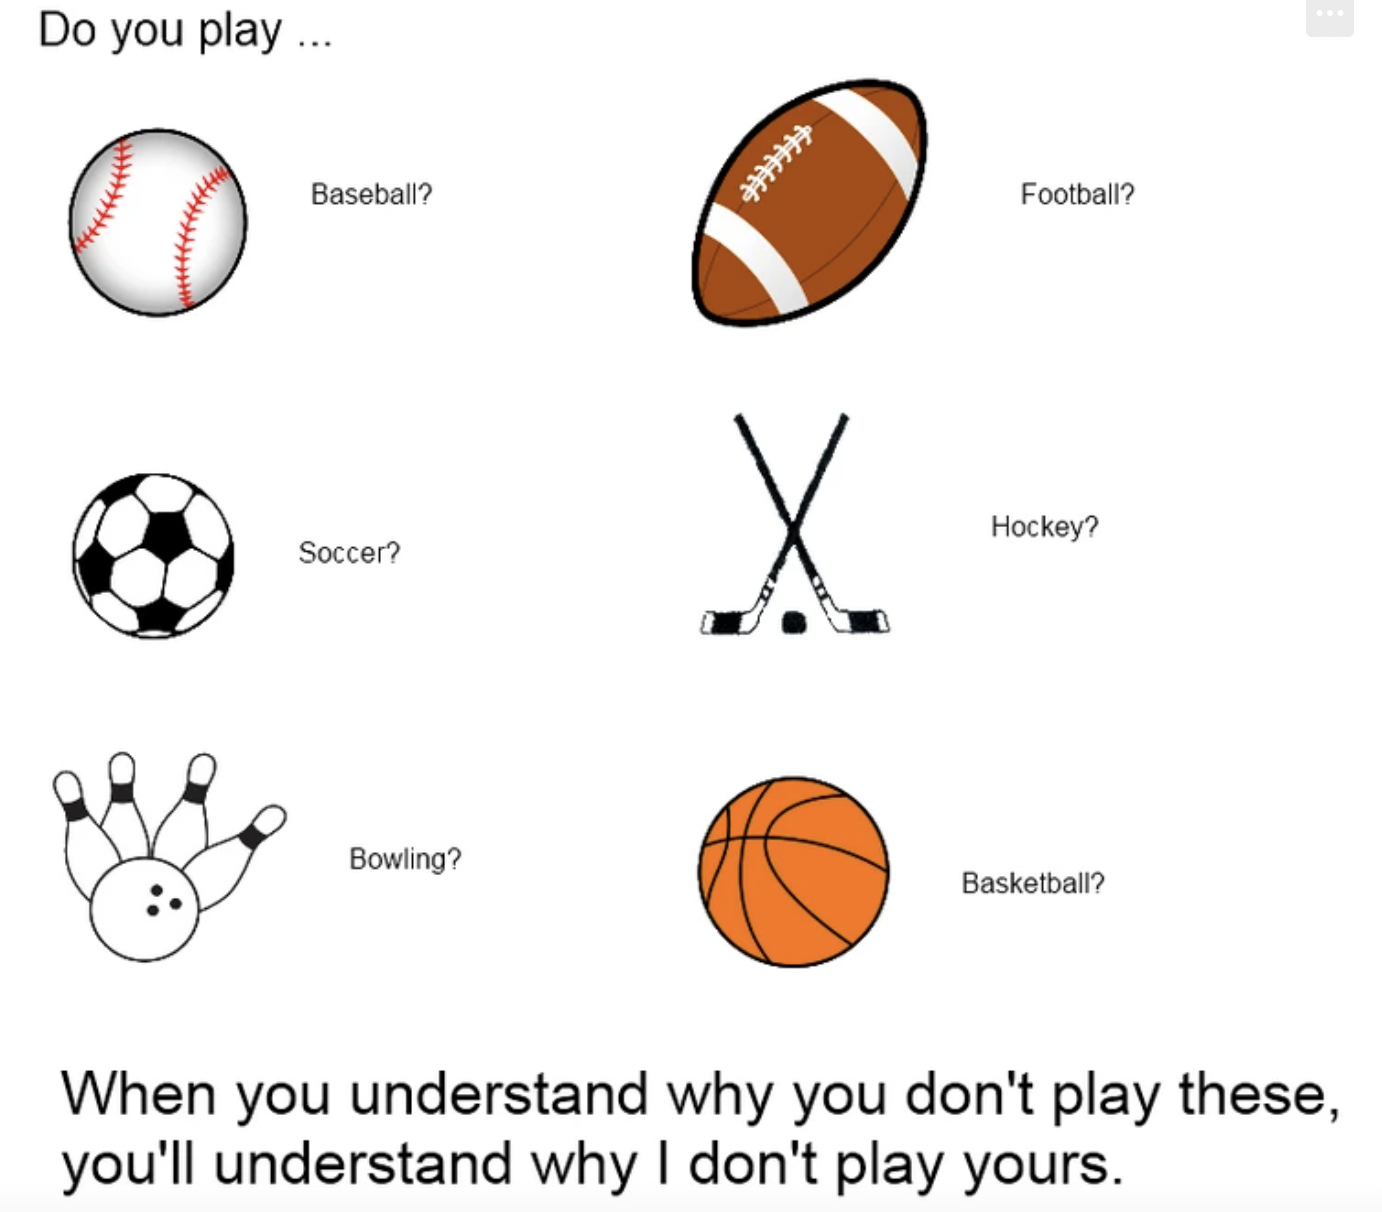 basketball - Do you play... Baseball? Soccer? Bowling? Football? Hockey? Basketball? When you understand why you don't play these, you'll understand why I don't play yours.